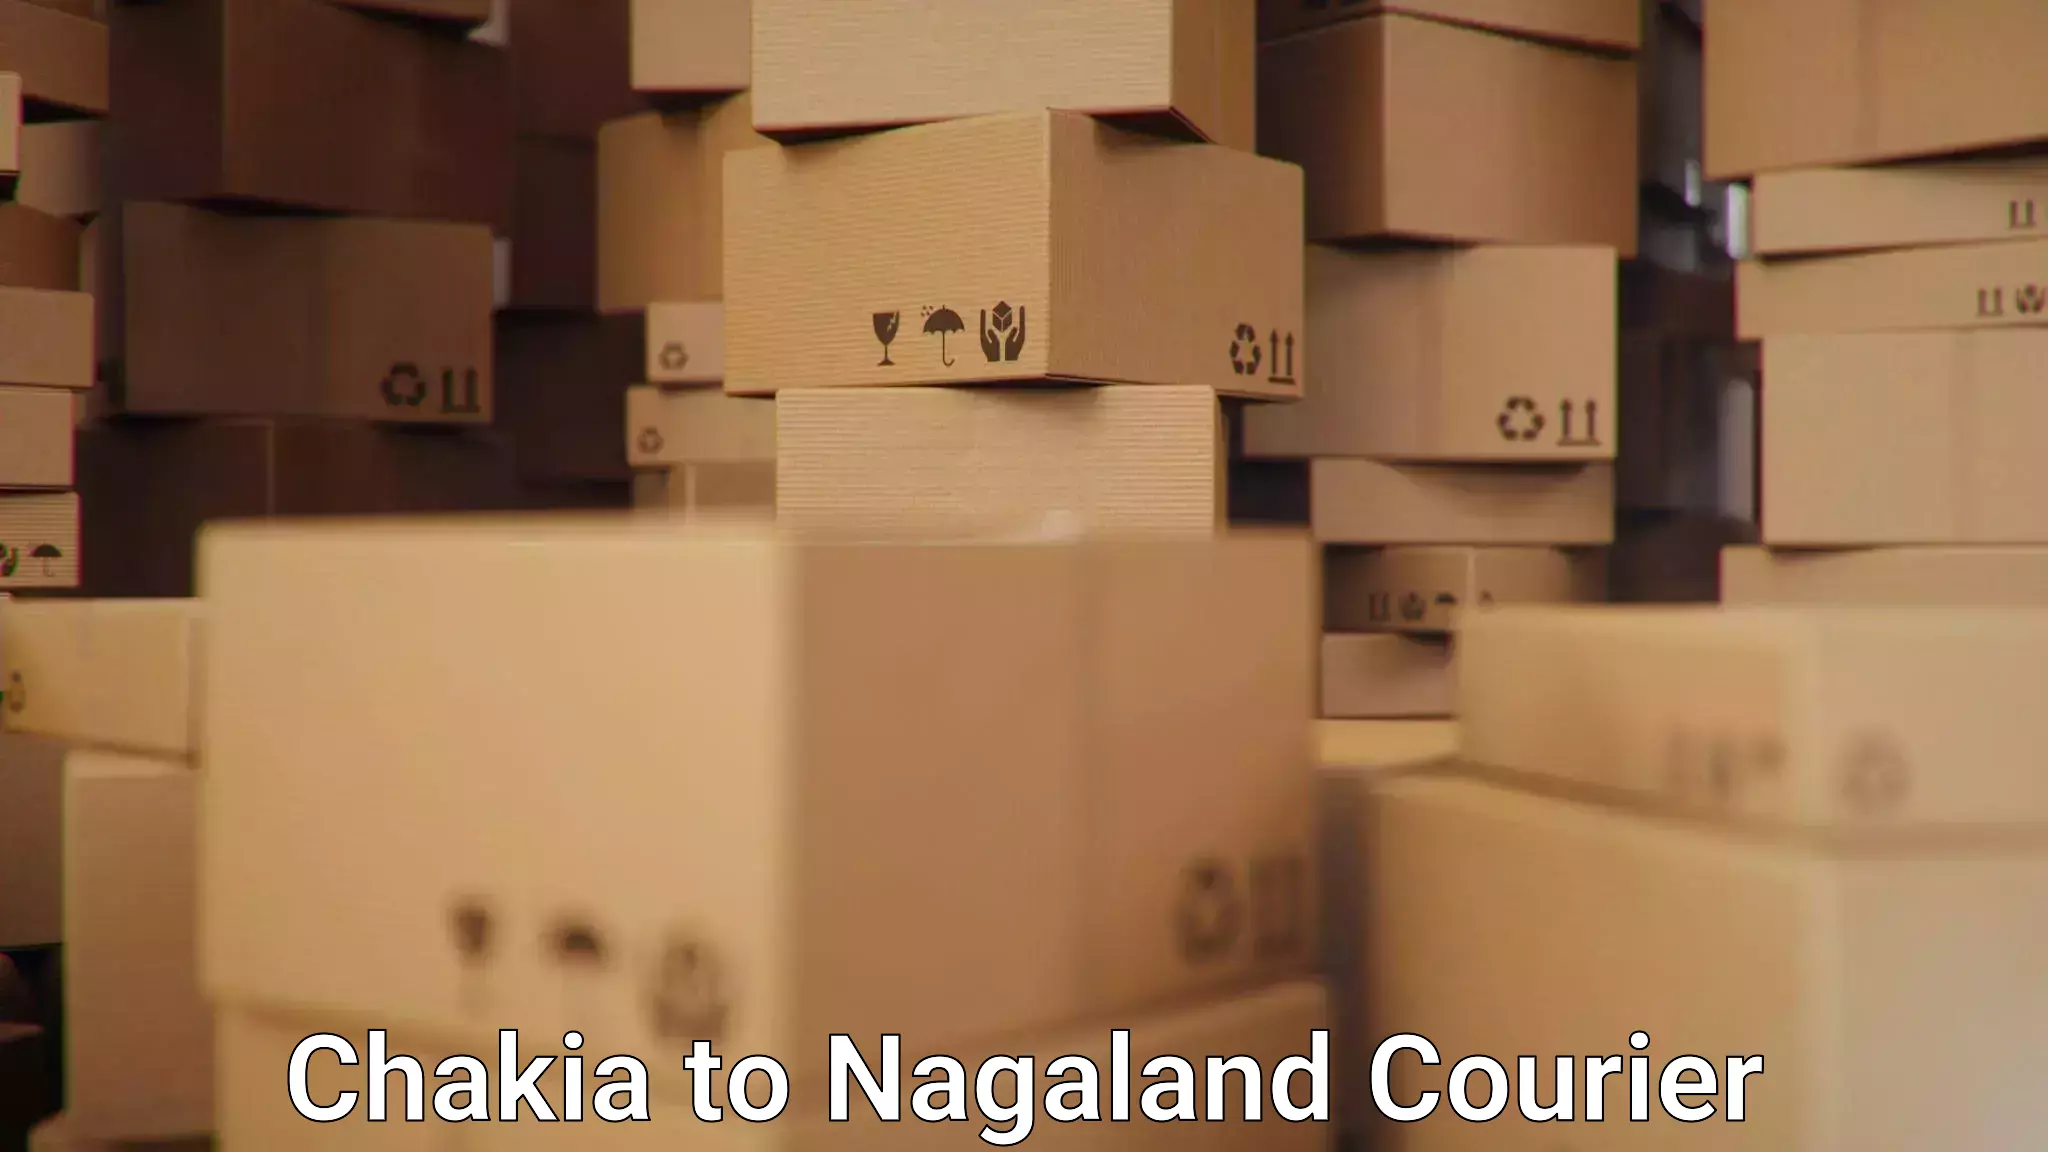 Professional courier handling Chakia to Nagaland